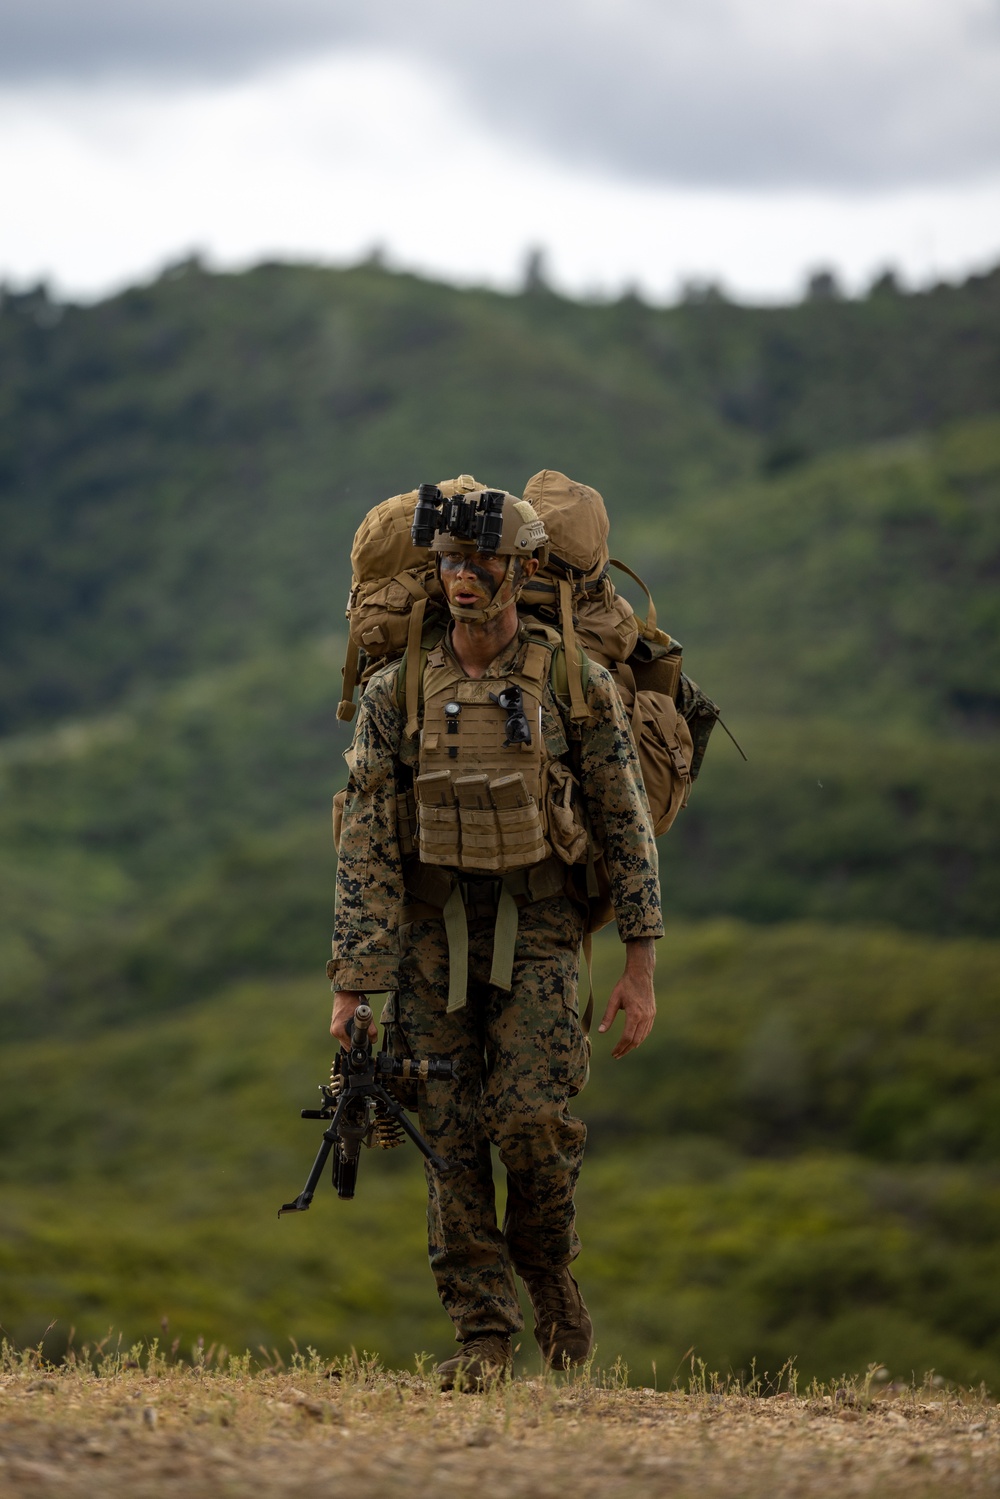 2nd Bn., 7th Marines trains with U.S. Air Force during a readiness exercise